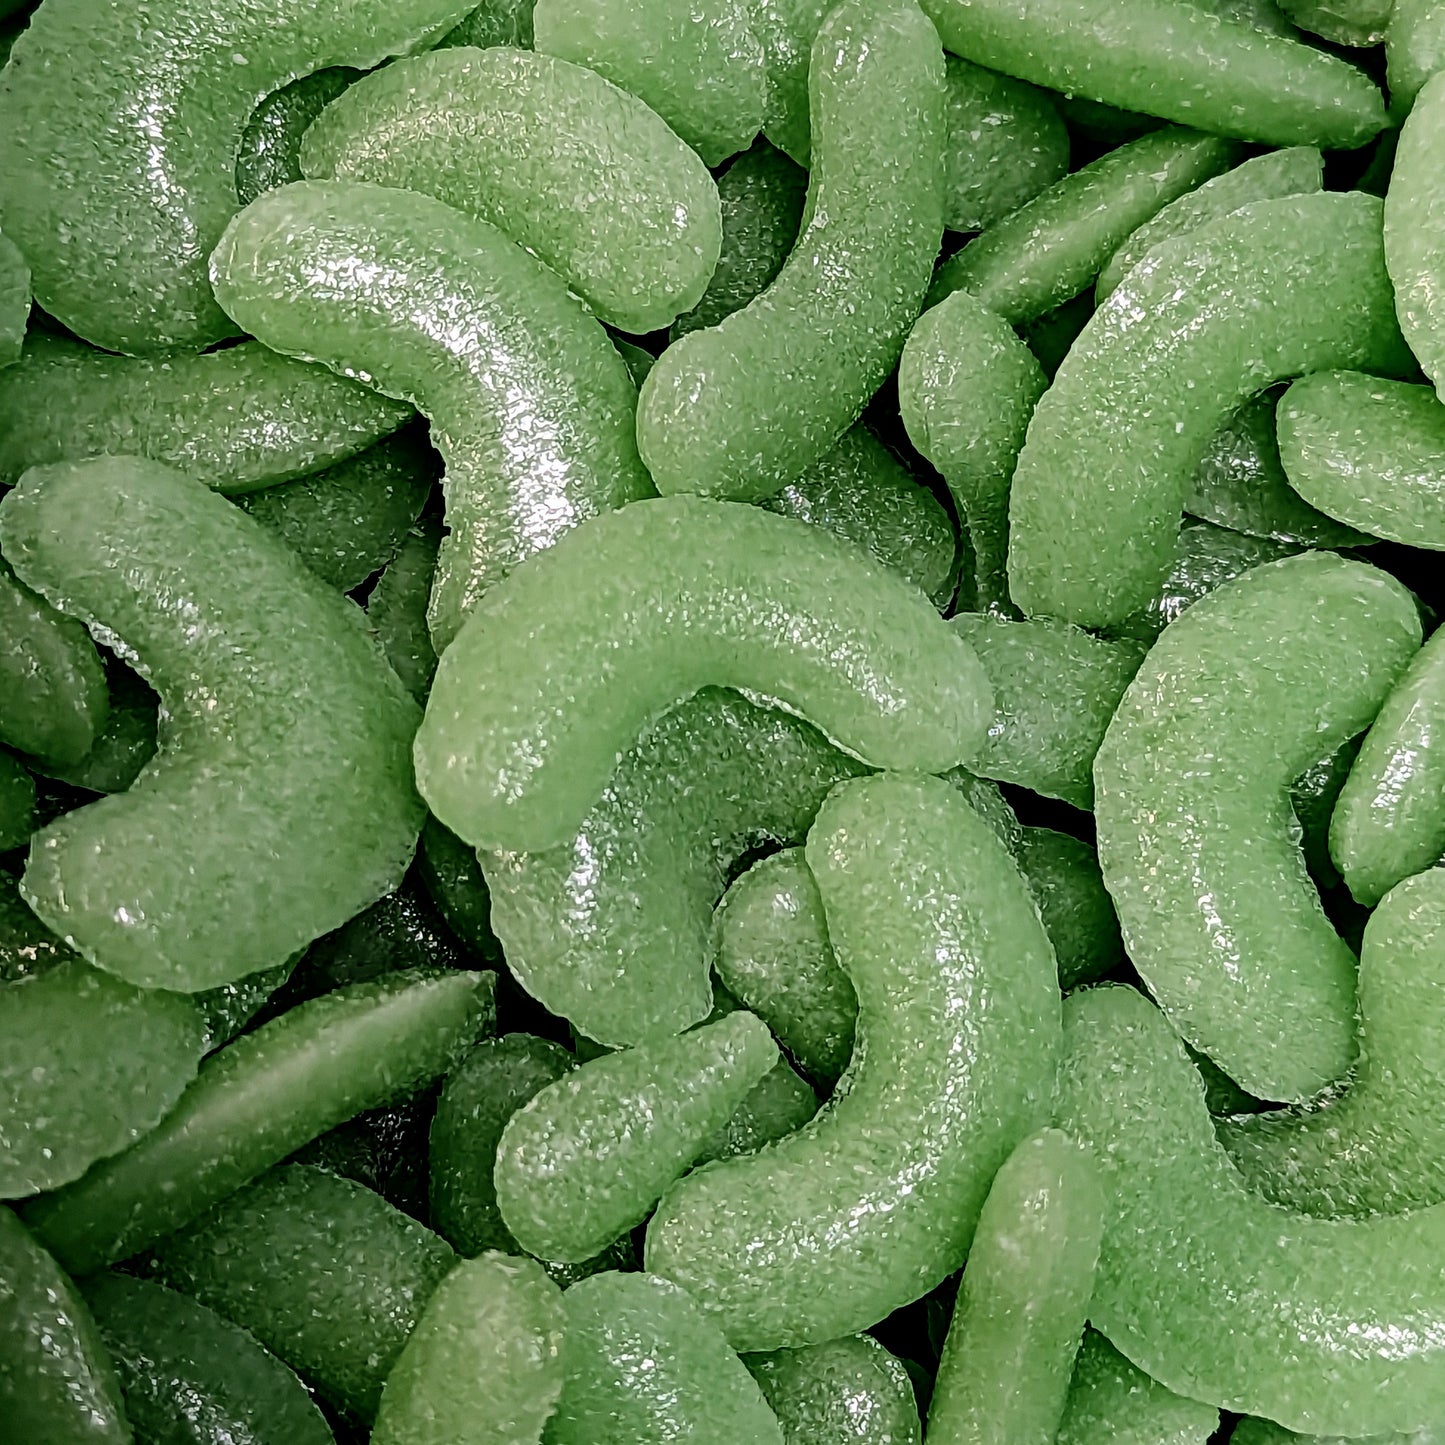 DILL-icious Hard Candy (Dill Pickle flavored)